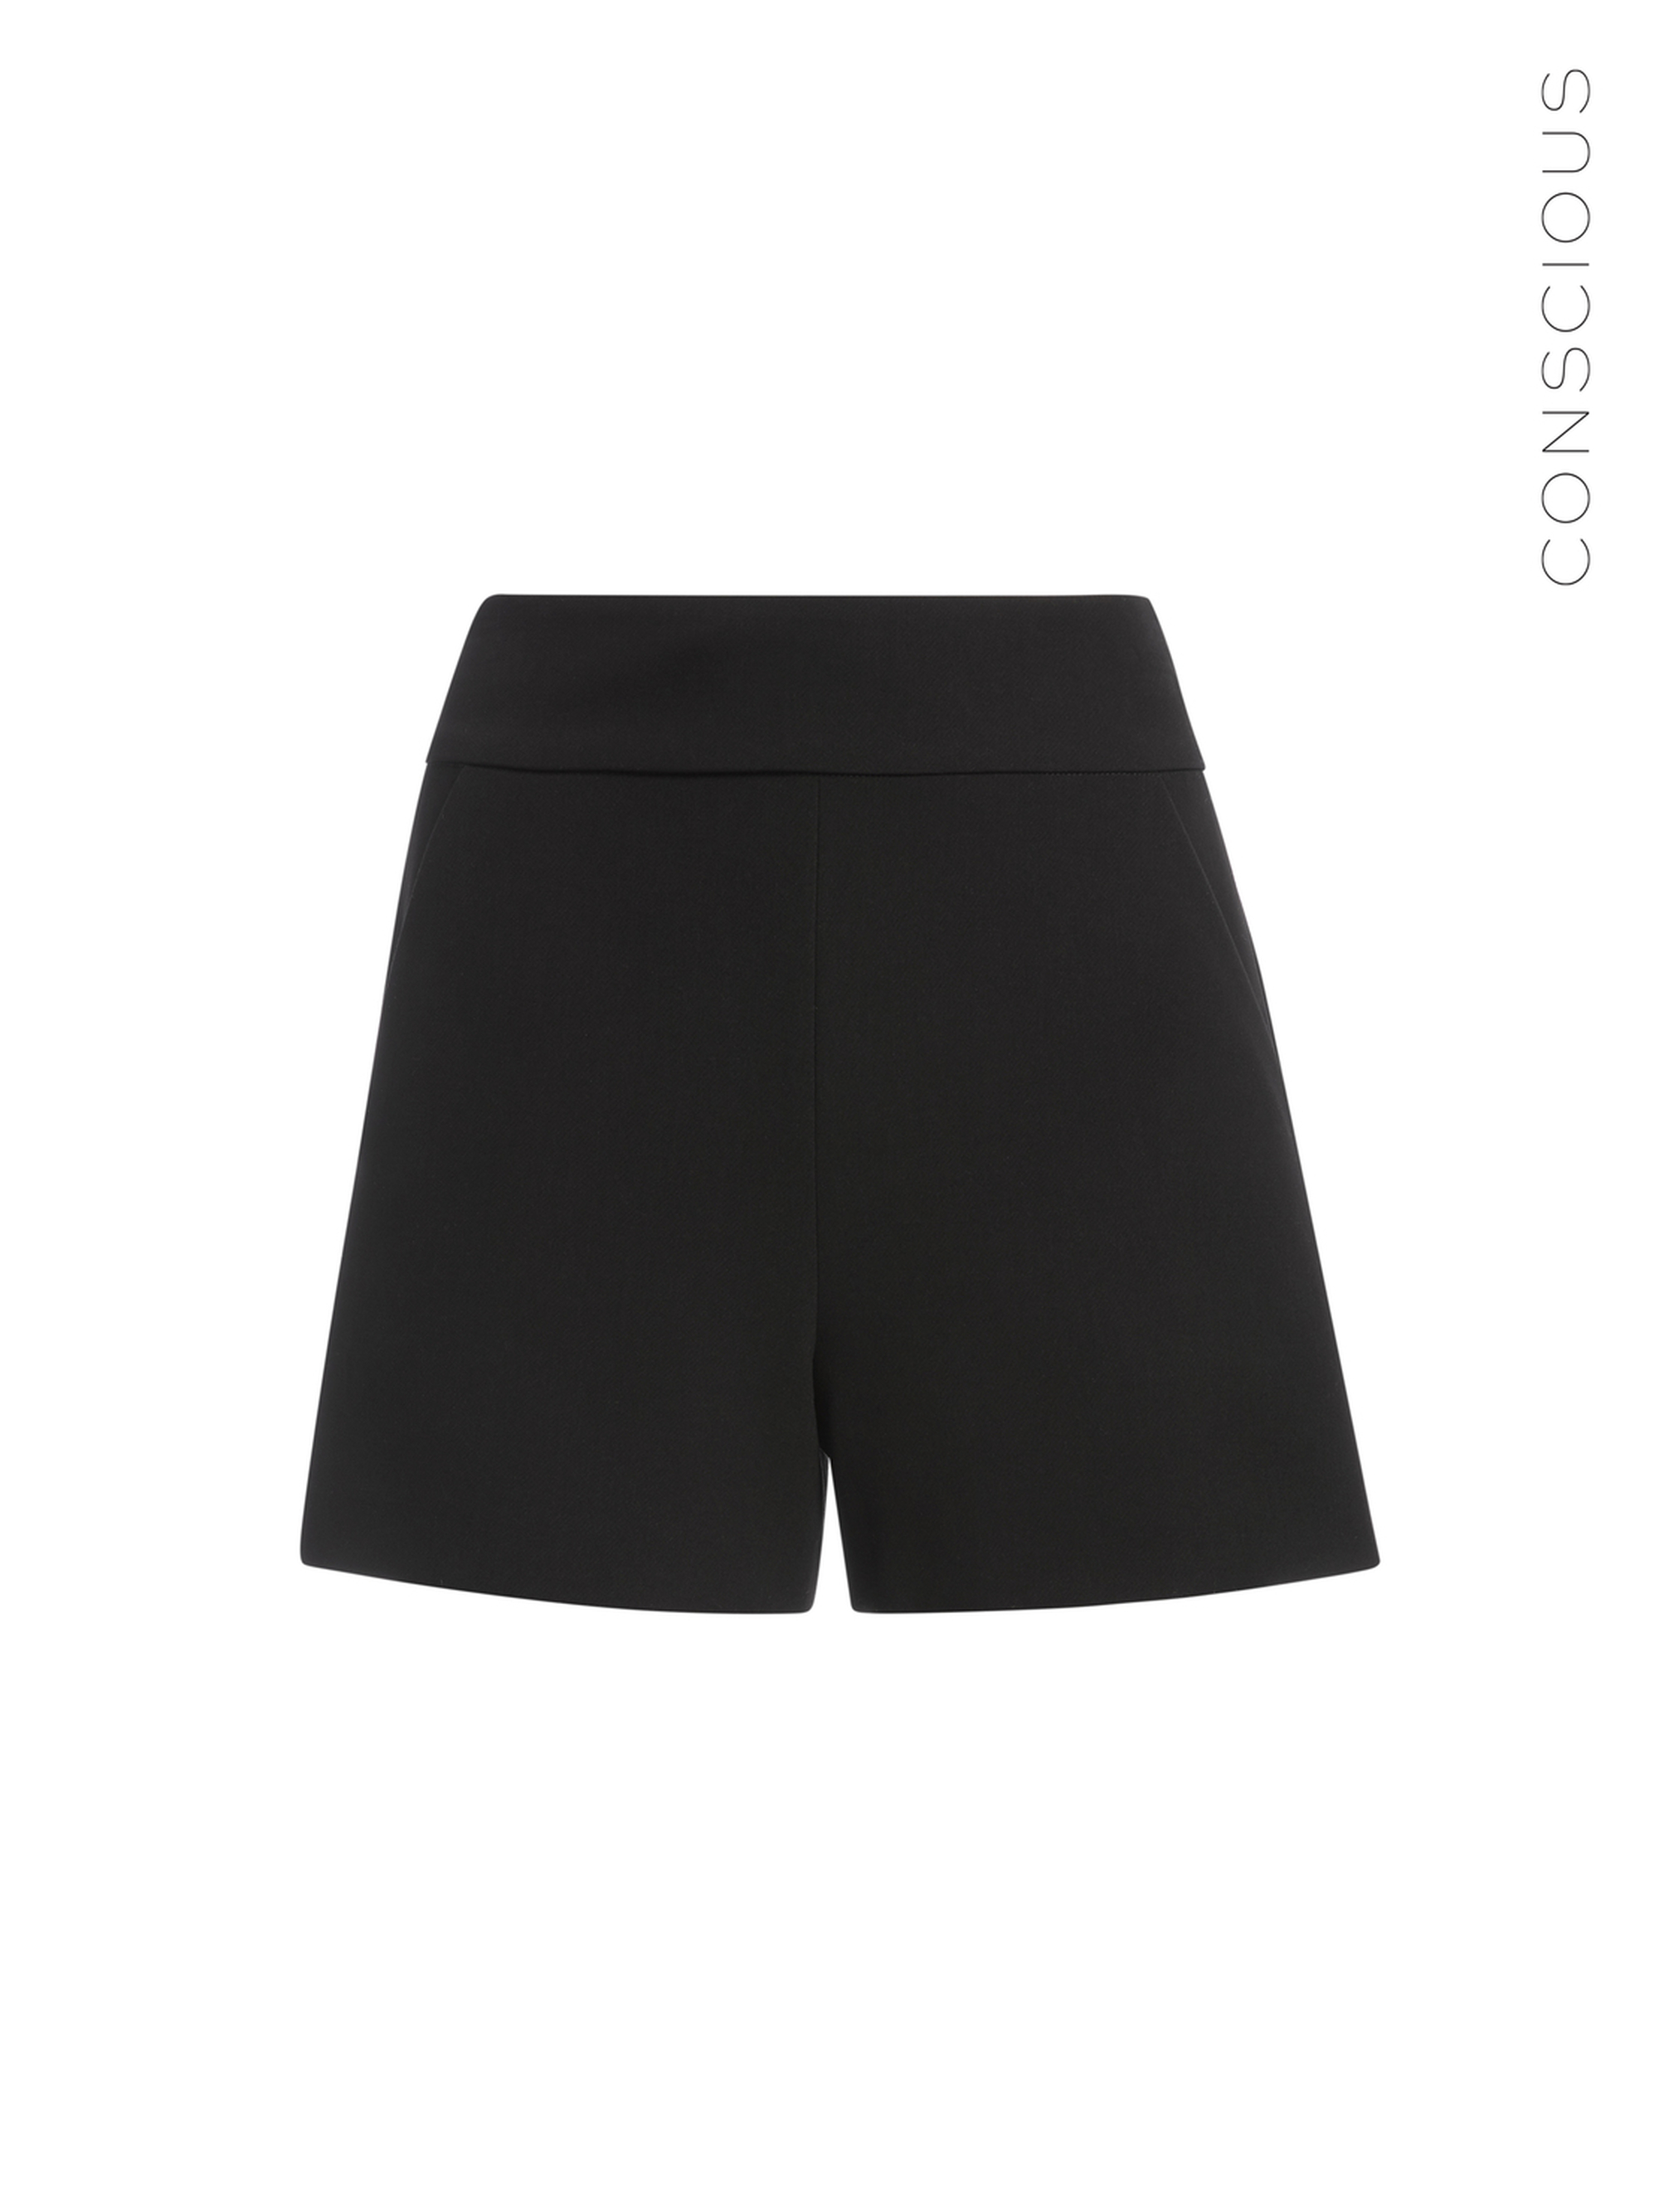 Donald High Waist Short In Black | Alice And Olivia